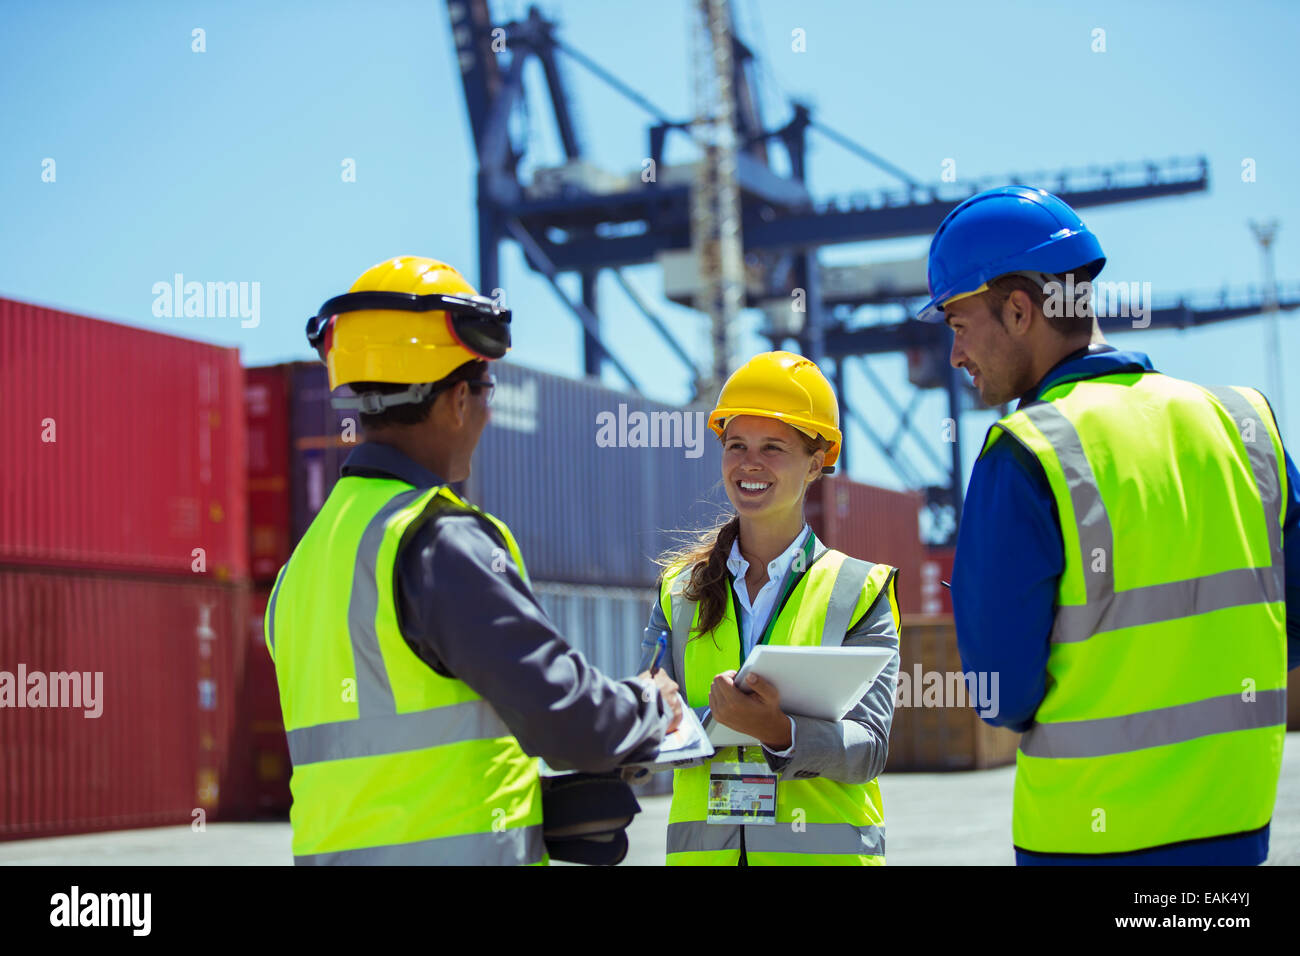 Business people and worker talking near cargo containers Stock Photo